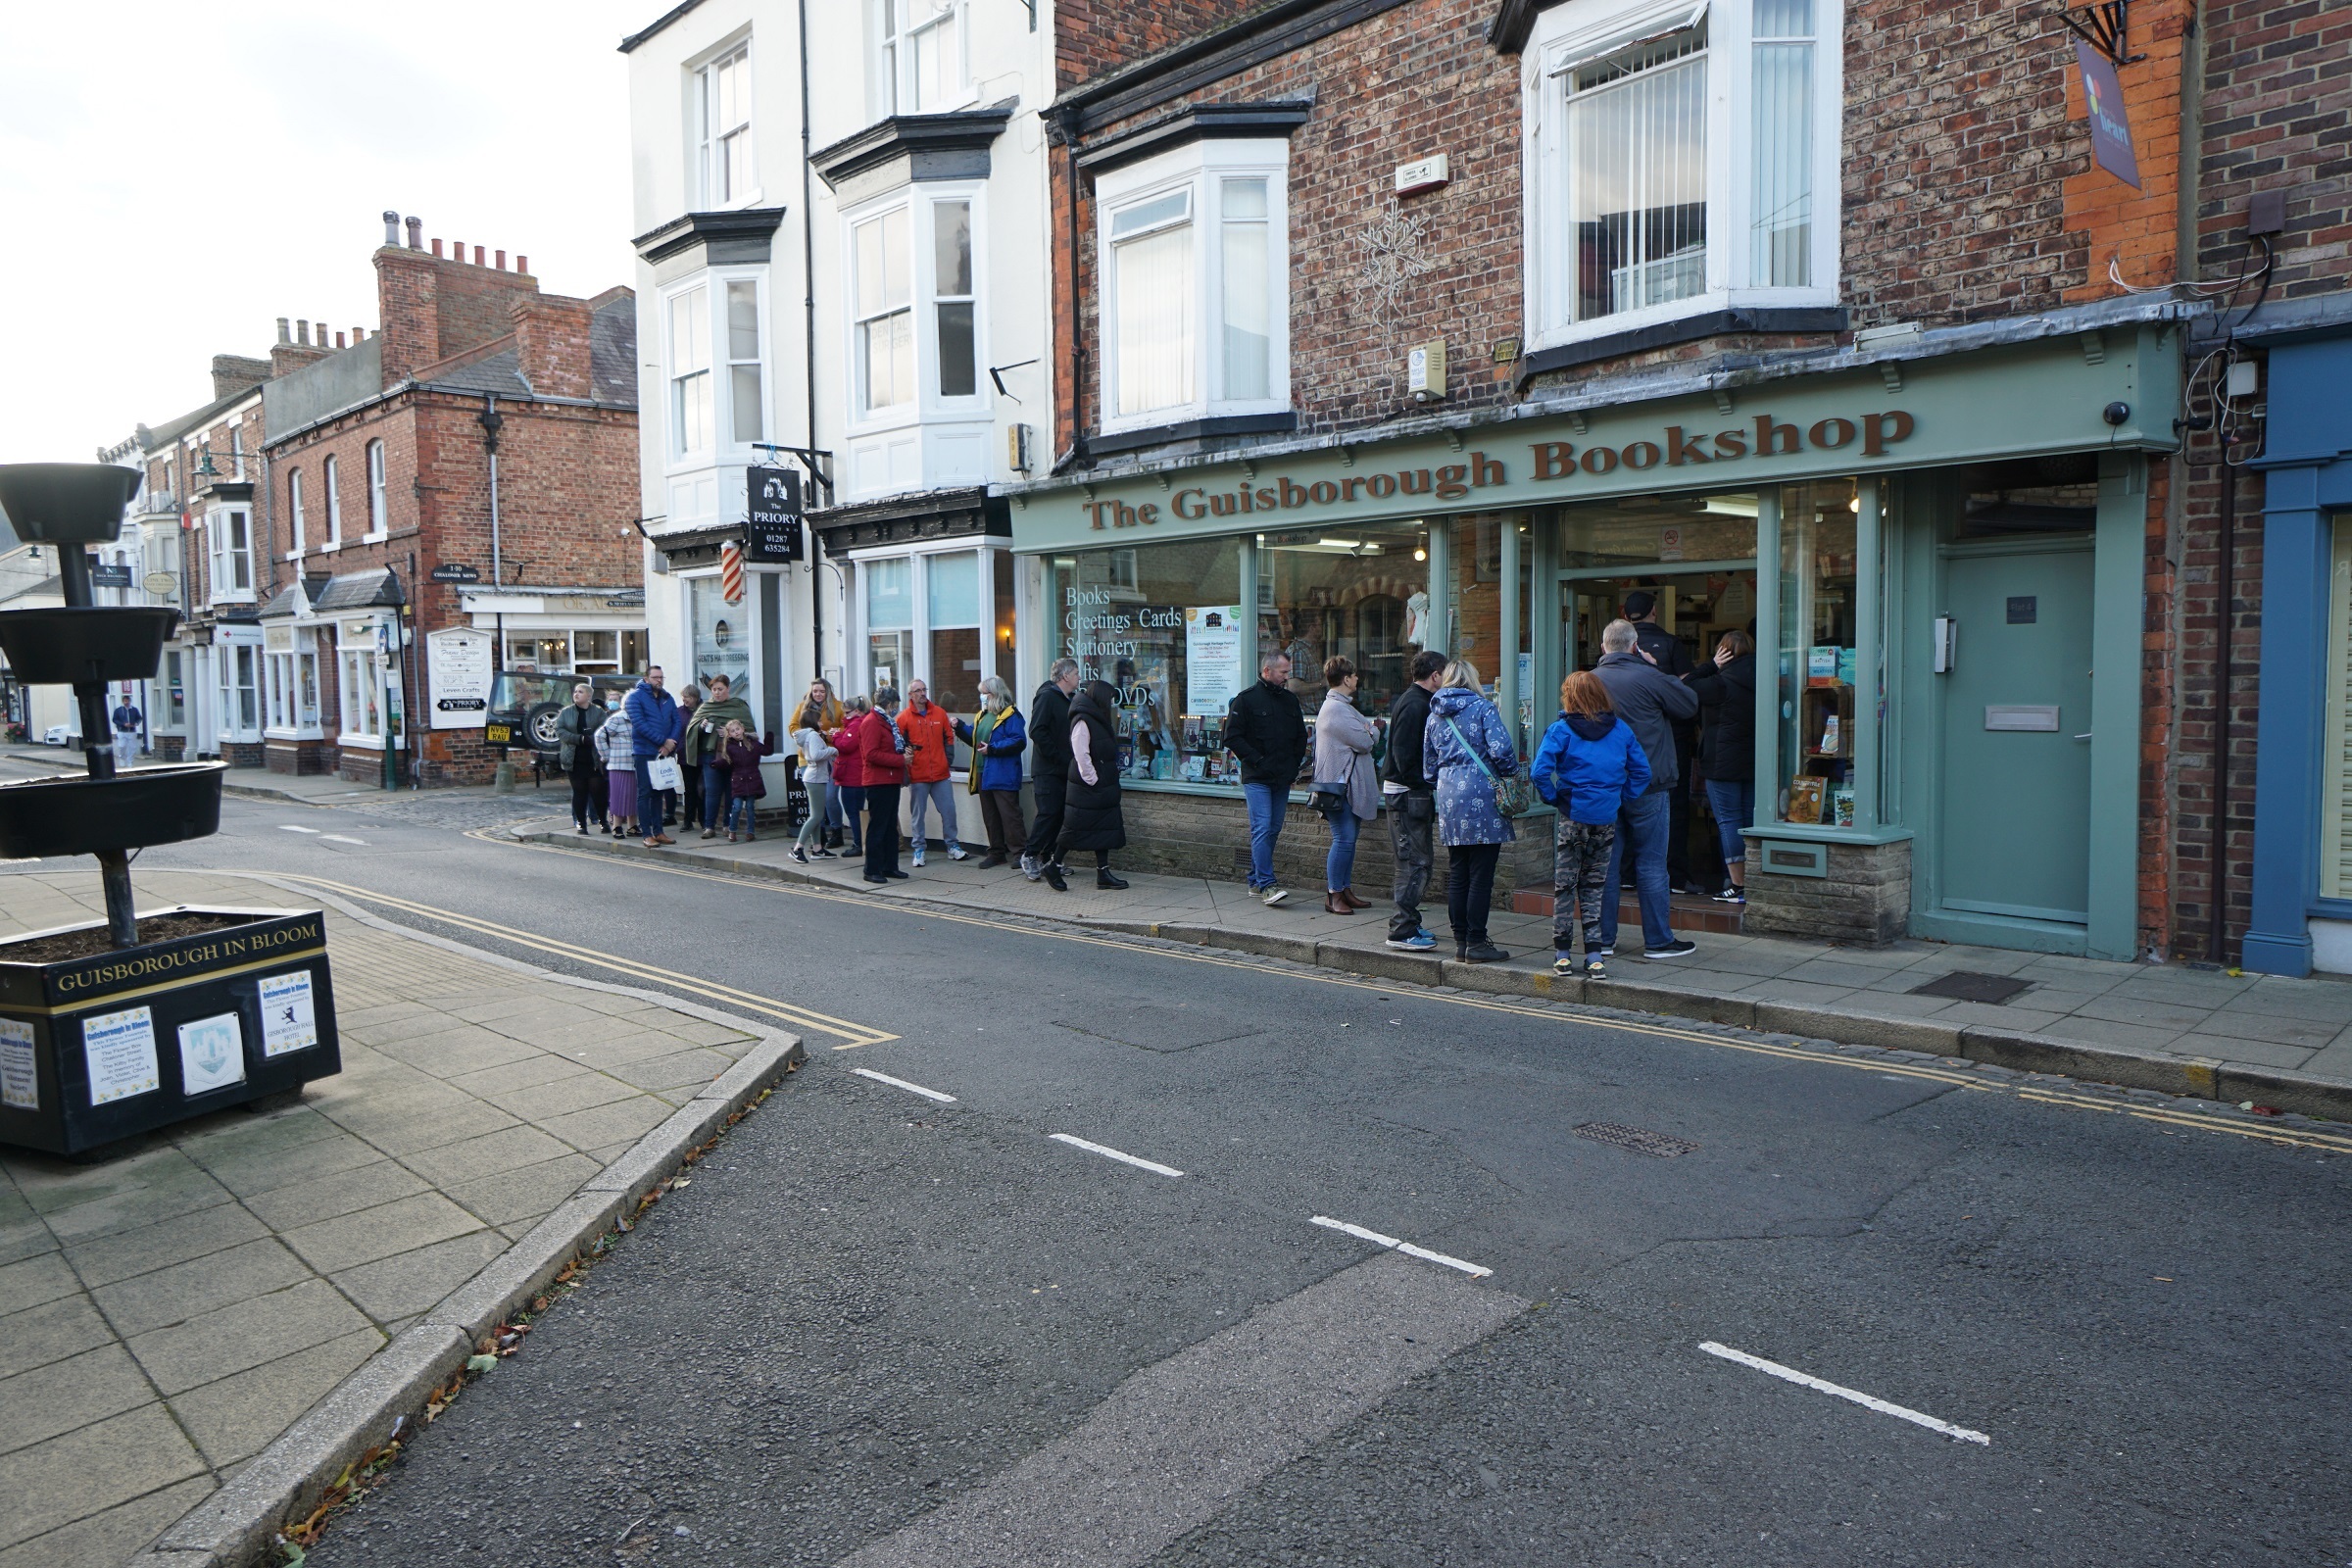 The queue in Chaloner Street outside the Bookshop some 15 minutes after Amanda Owen started to sign books